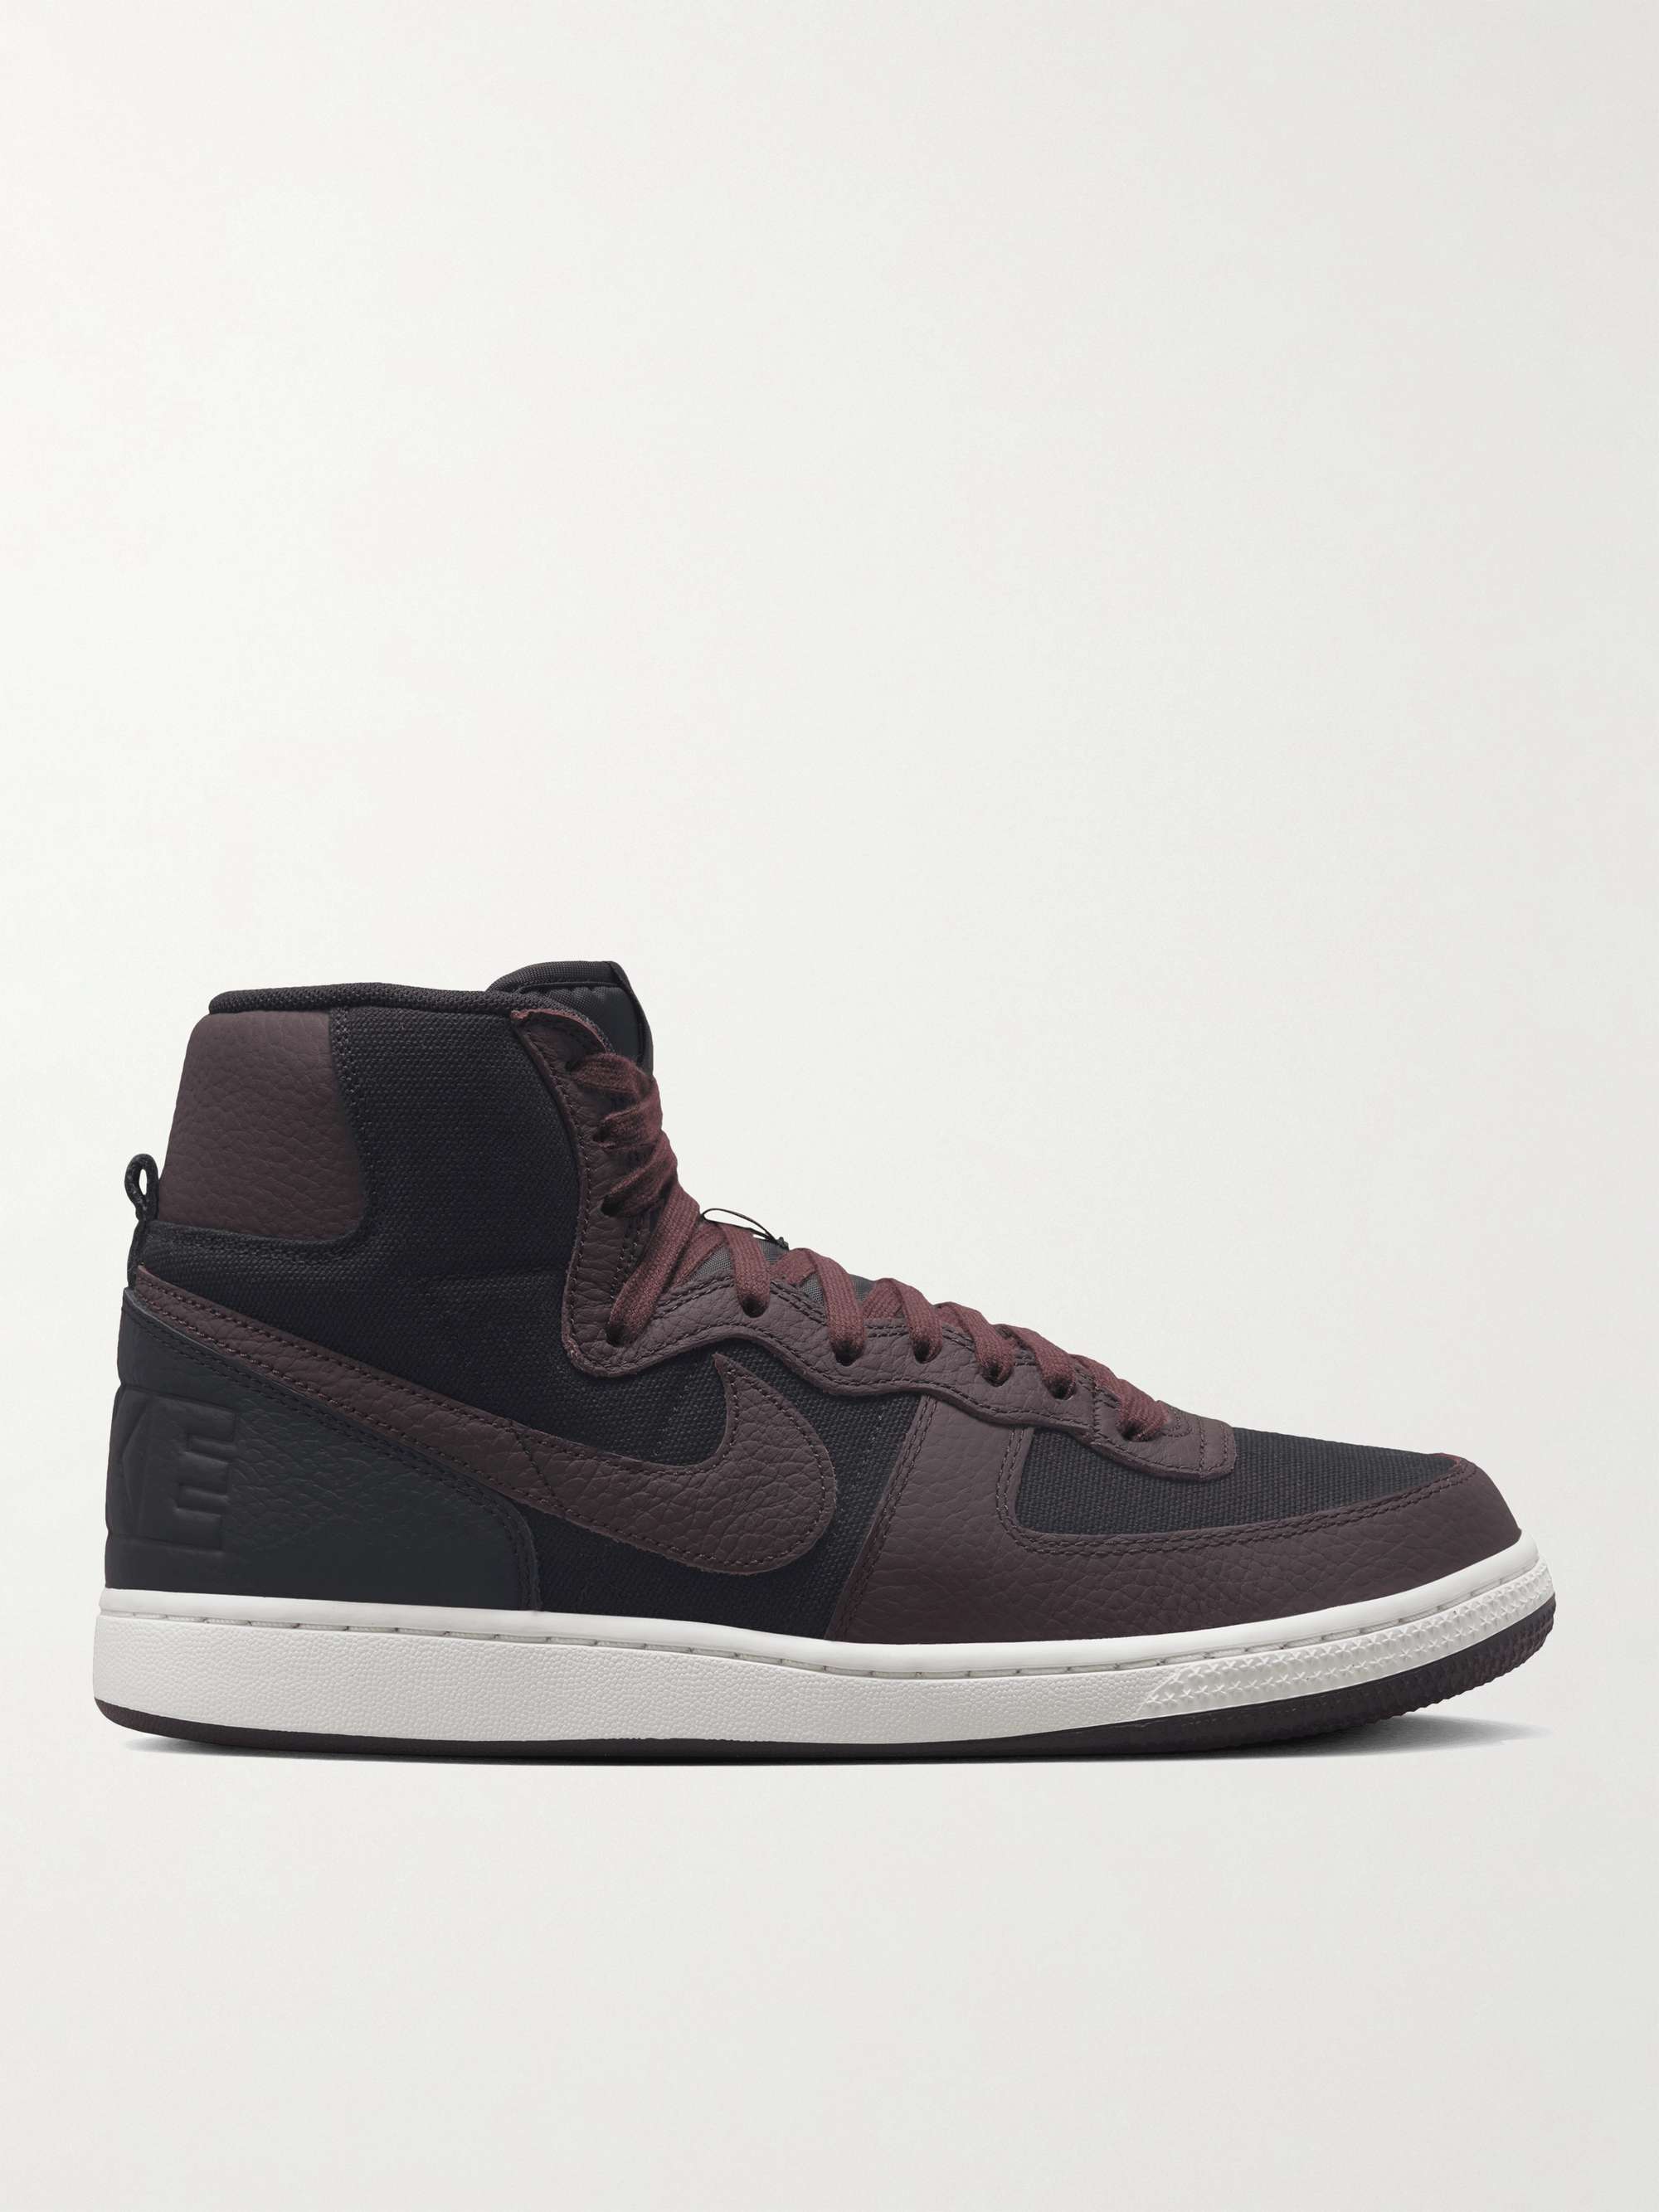 NIKE Terminator Leather-Trimmed Canvas High-Top Sneakers for Men | MR PORTER